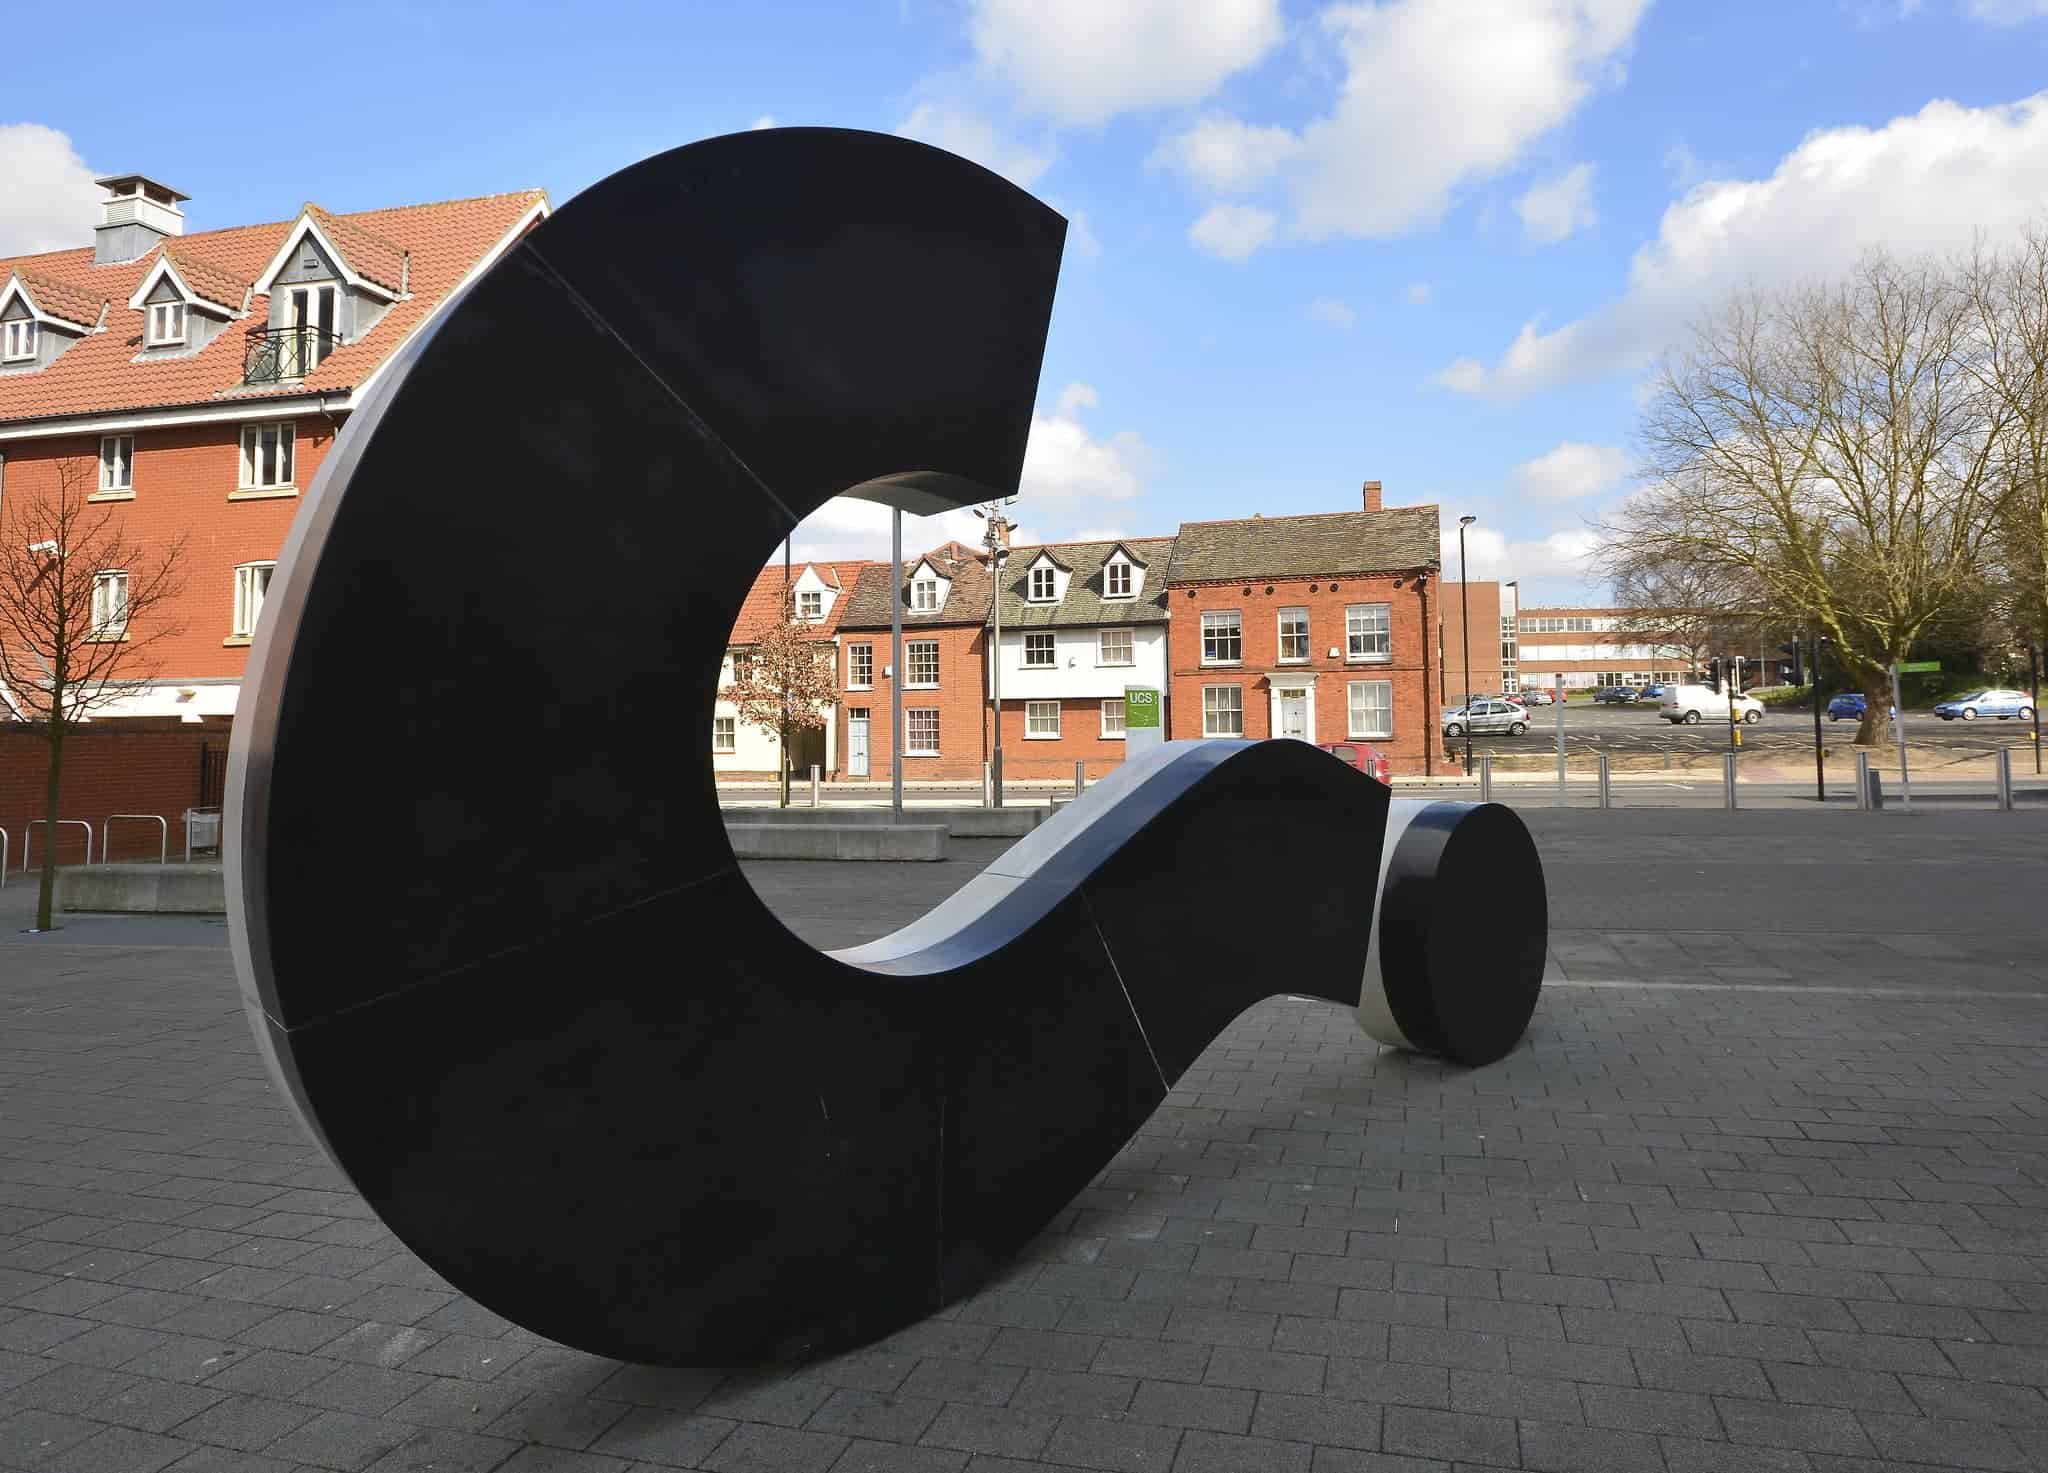 Large question mark sculpture in the street